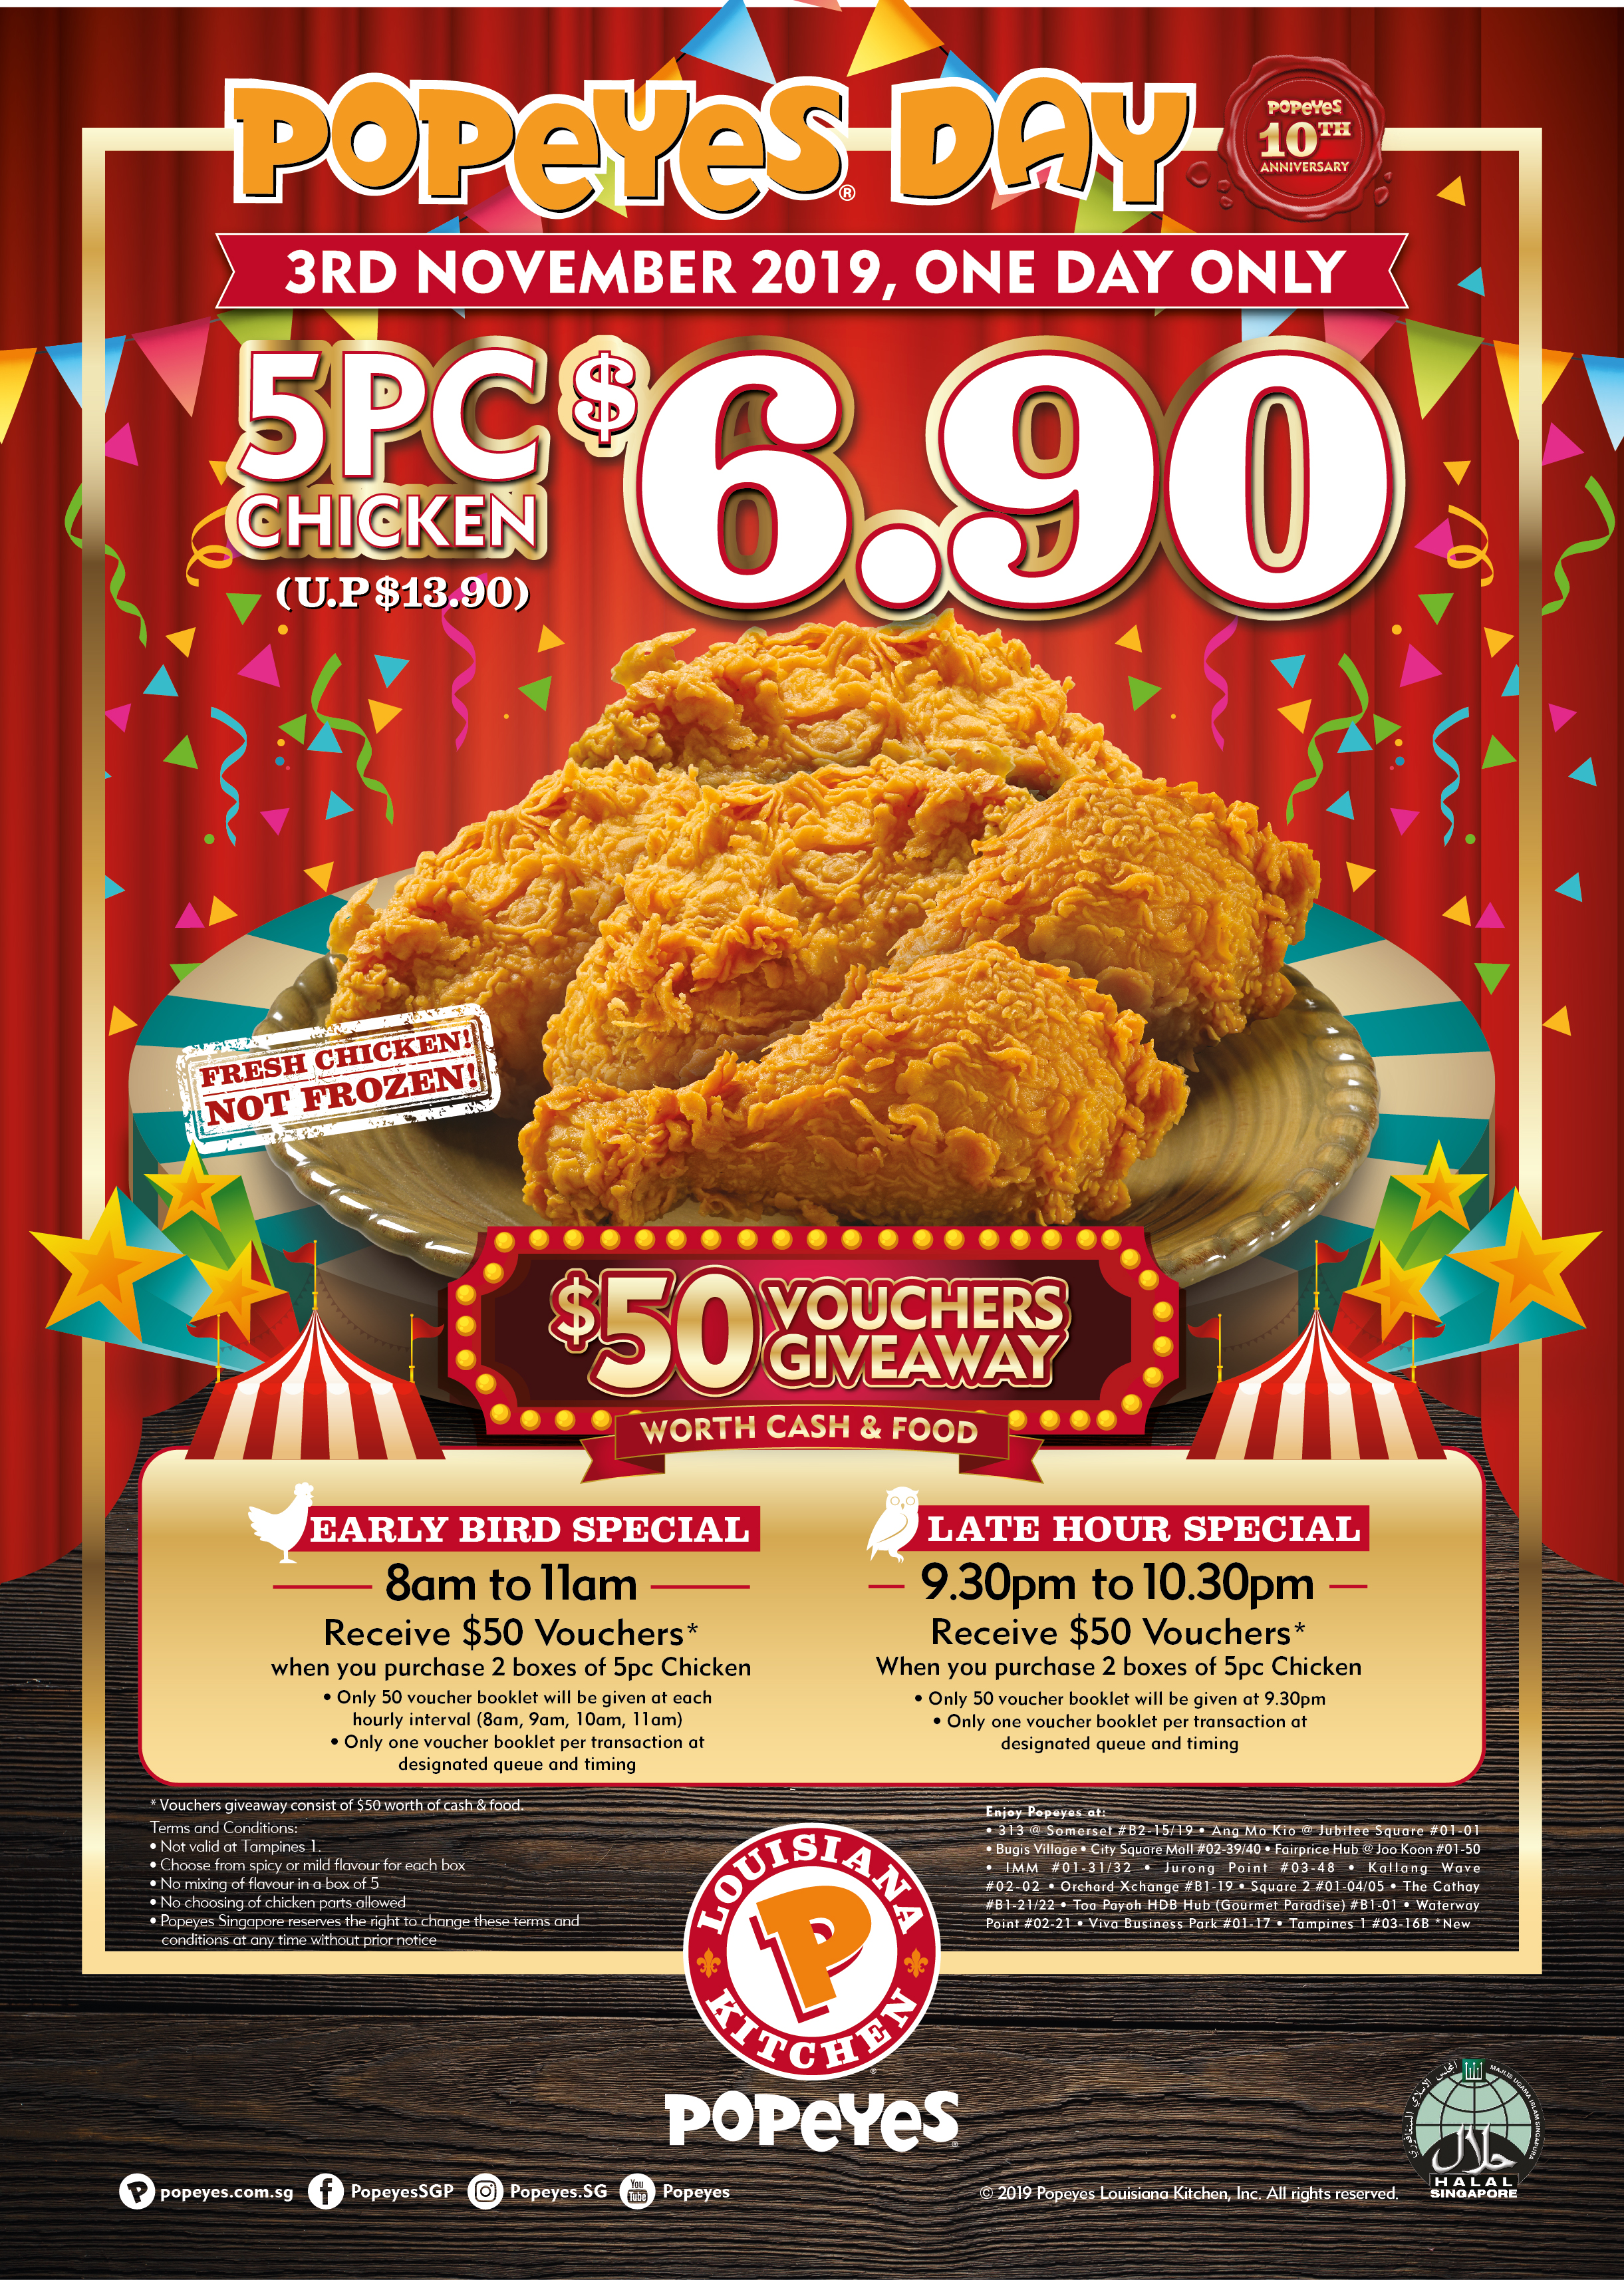 Popeyes’s 5 Pcs Chicken Will Cost $6.90 (U.P. $13.90) On 3 Nov 2019 Because It’s Popeyes Day - 1